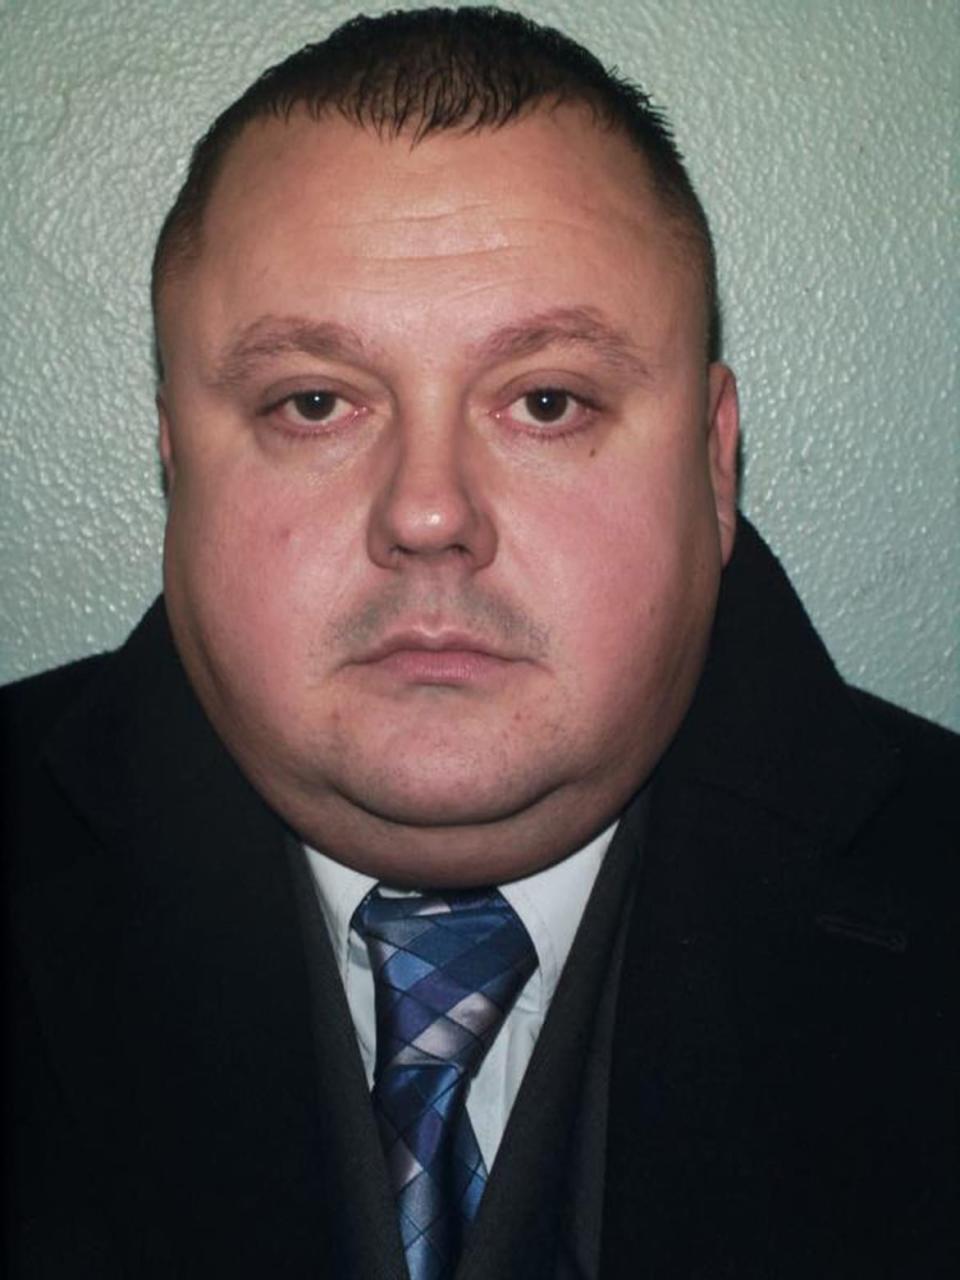 <div class="inline-image__caption"><p>Convicted murderer Levi Bellfield is seen in this handout photograph. The former nightclub doorman was found guilty of beating two female students to death near bus stops in London.</p></div> <div class="inline-image__credit">Reuters</div>